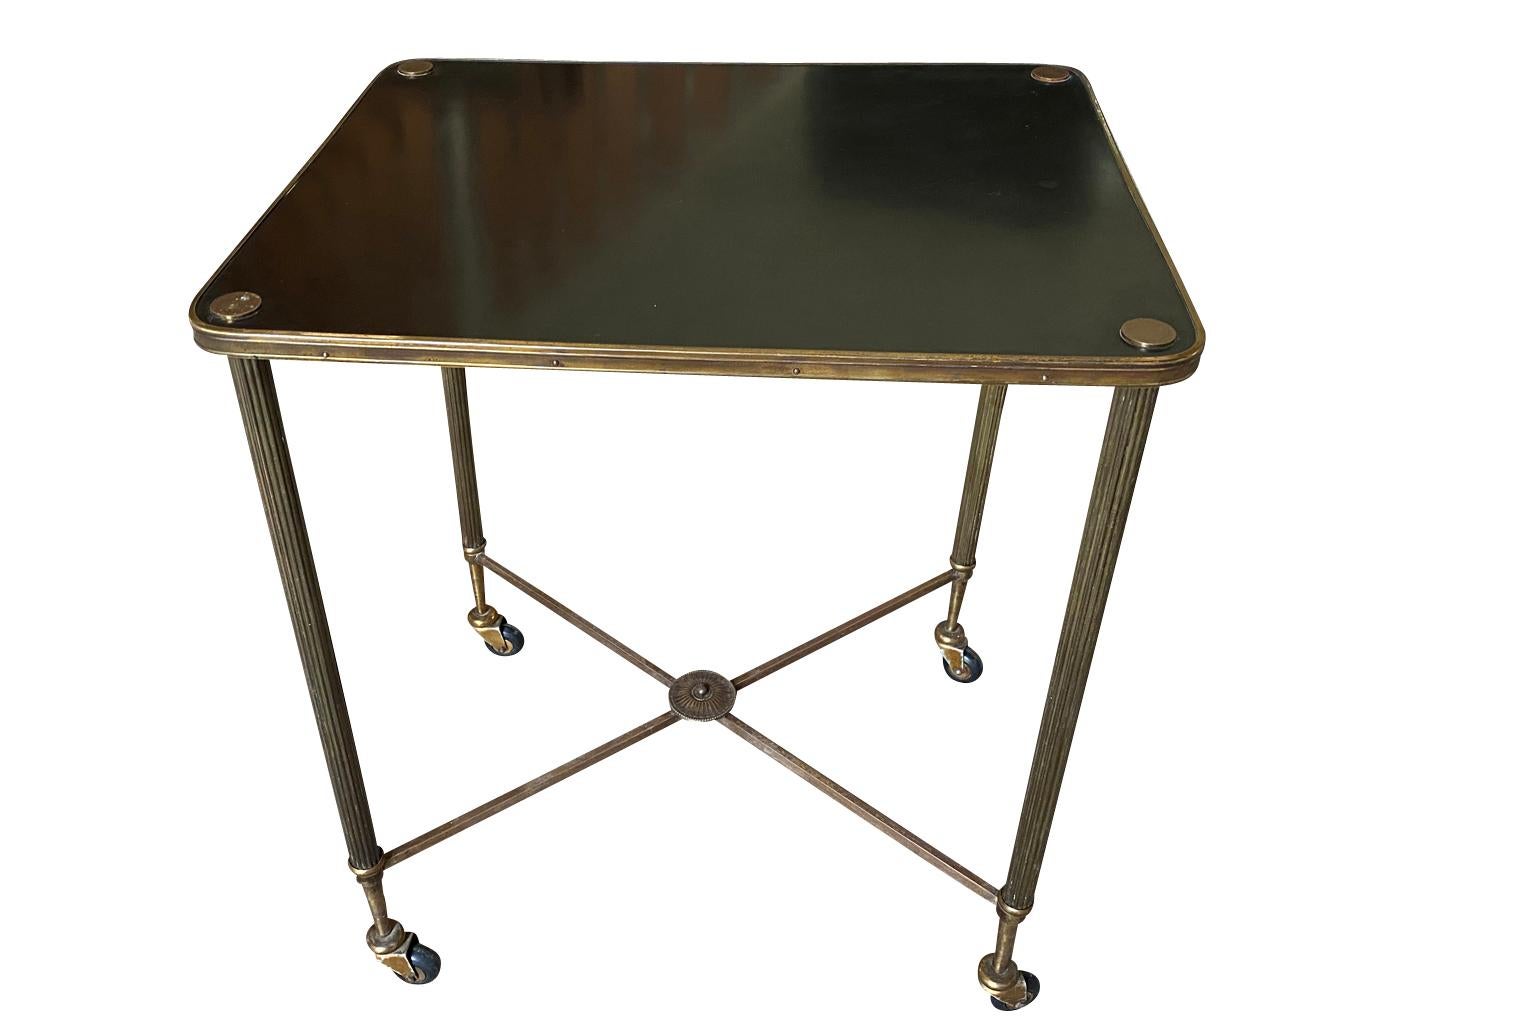 A stunning mid-20th century Drinks Table - Cocktail Table in the Maison Jansen taste.  Soundly constructed from brass.  An elegant accent piece.